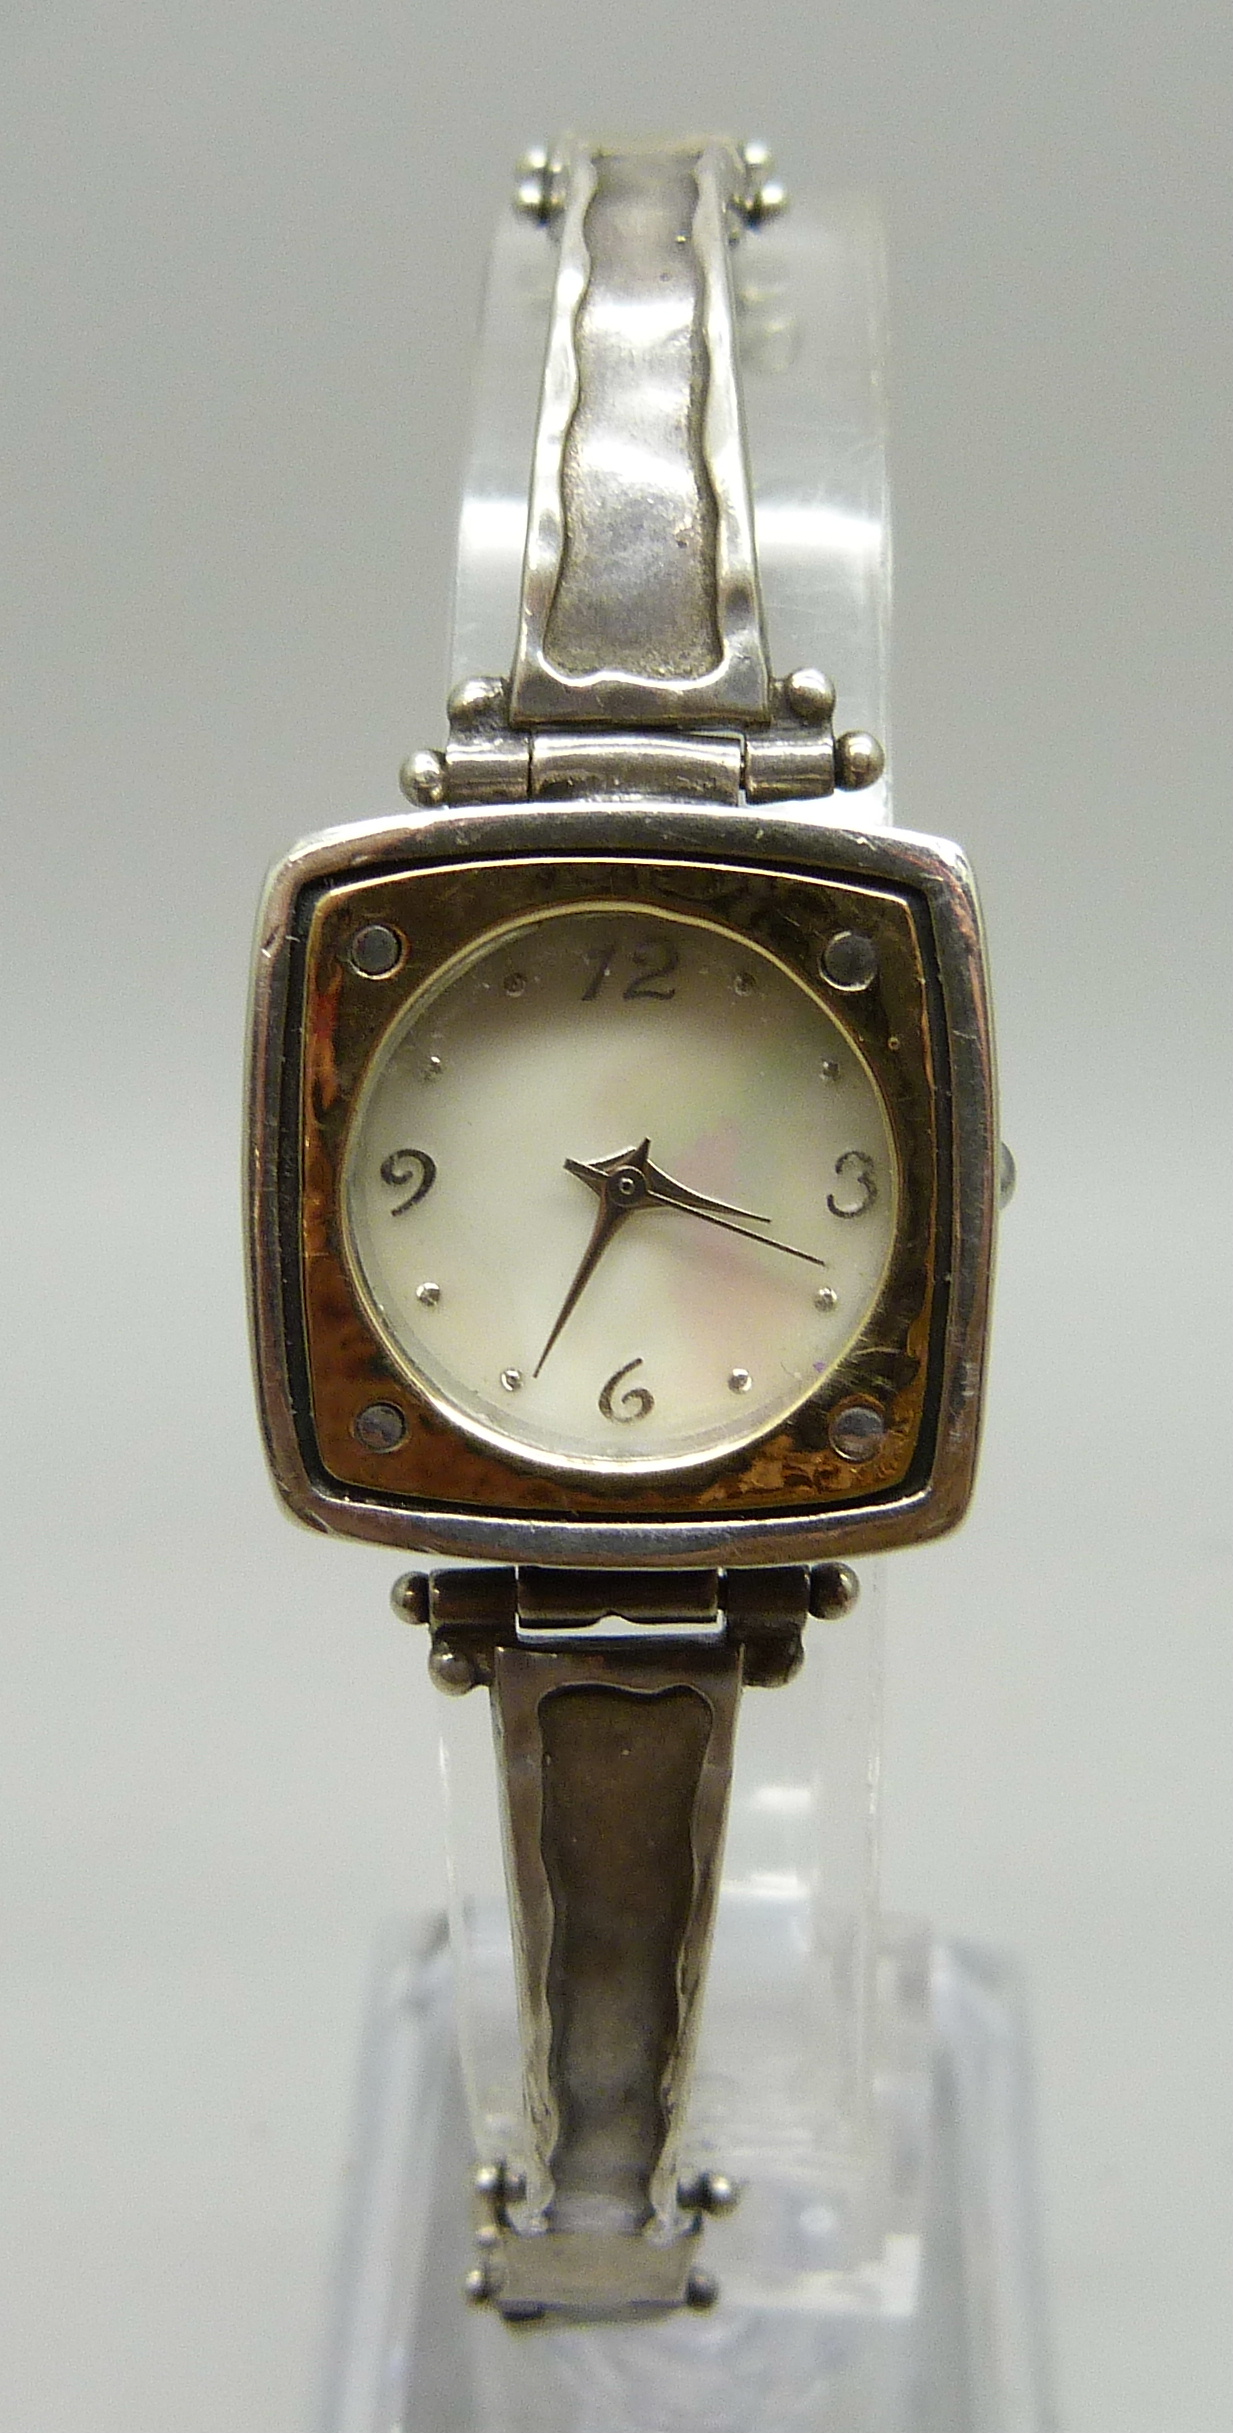 A lady's silver wristwatch with hammered design bezel and strap, hallmarked on the clasp with